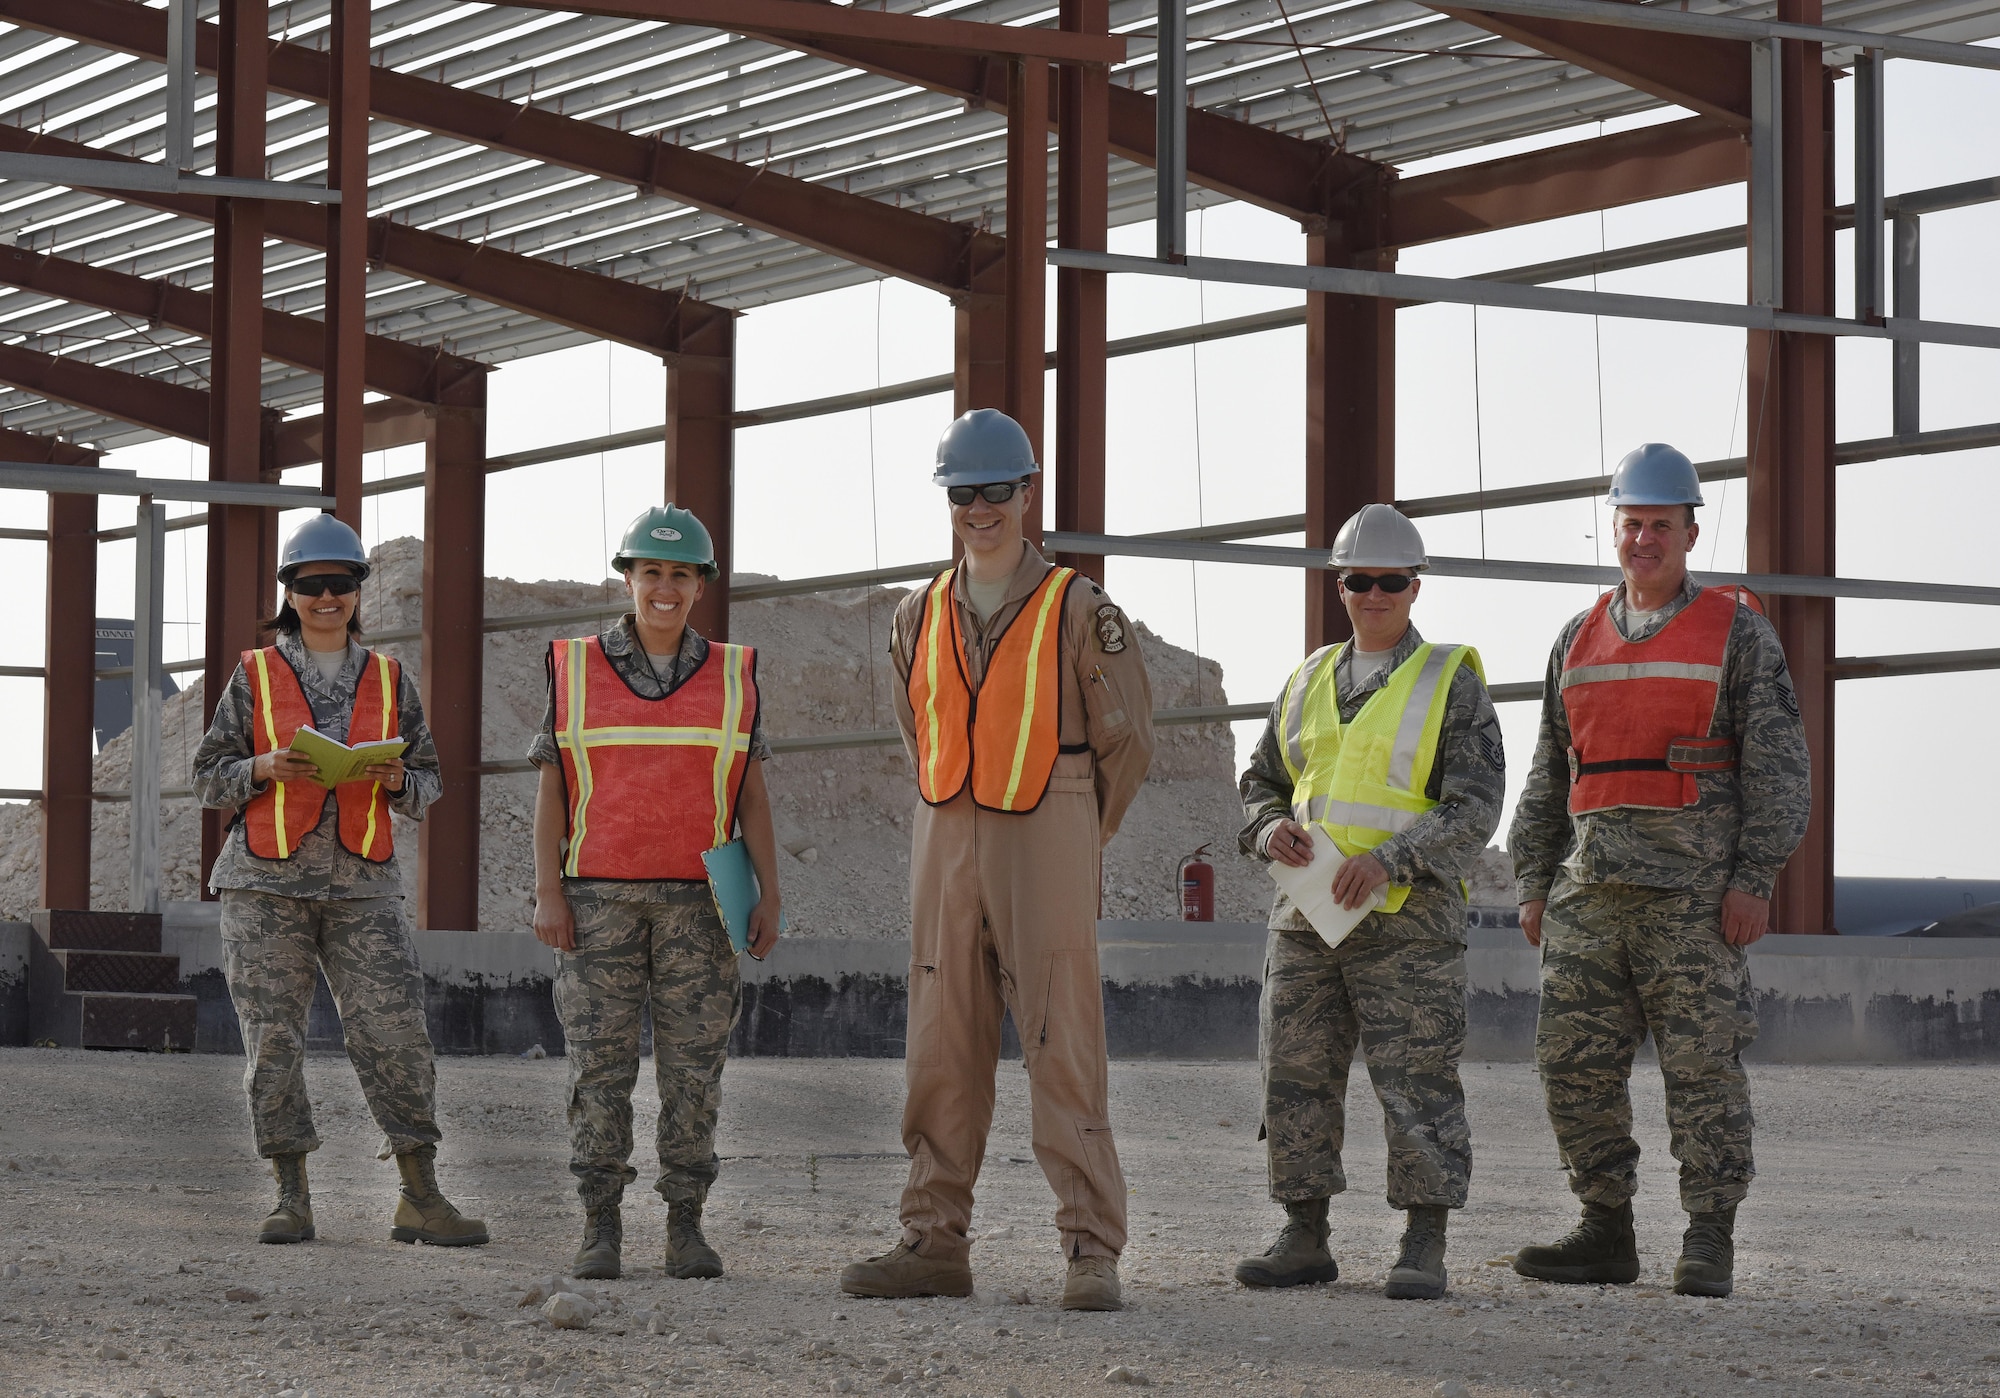 Airmen with the 379th Air Expeditionary Wing Safety Office occupational safety section pose for a photo at Al Udeid Air Base, Qatar, April 14, 2017. As occupational safety Airmen, their primary focus at Al Udeid is to investigate any job-related mishaps in order to prevent future incidents. (U.S. Air Force photo by Senior Airman Cynthia A. Innocenti)